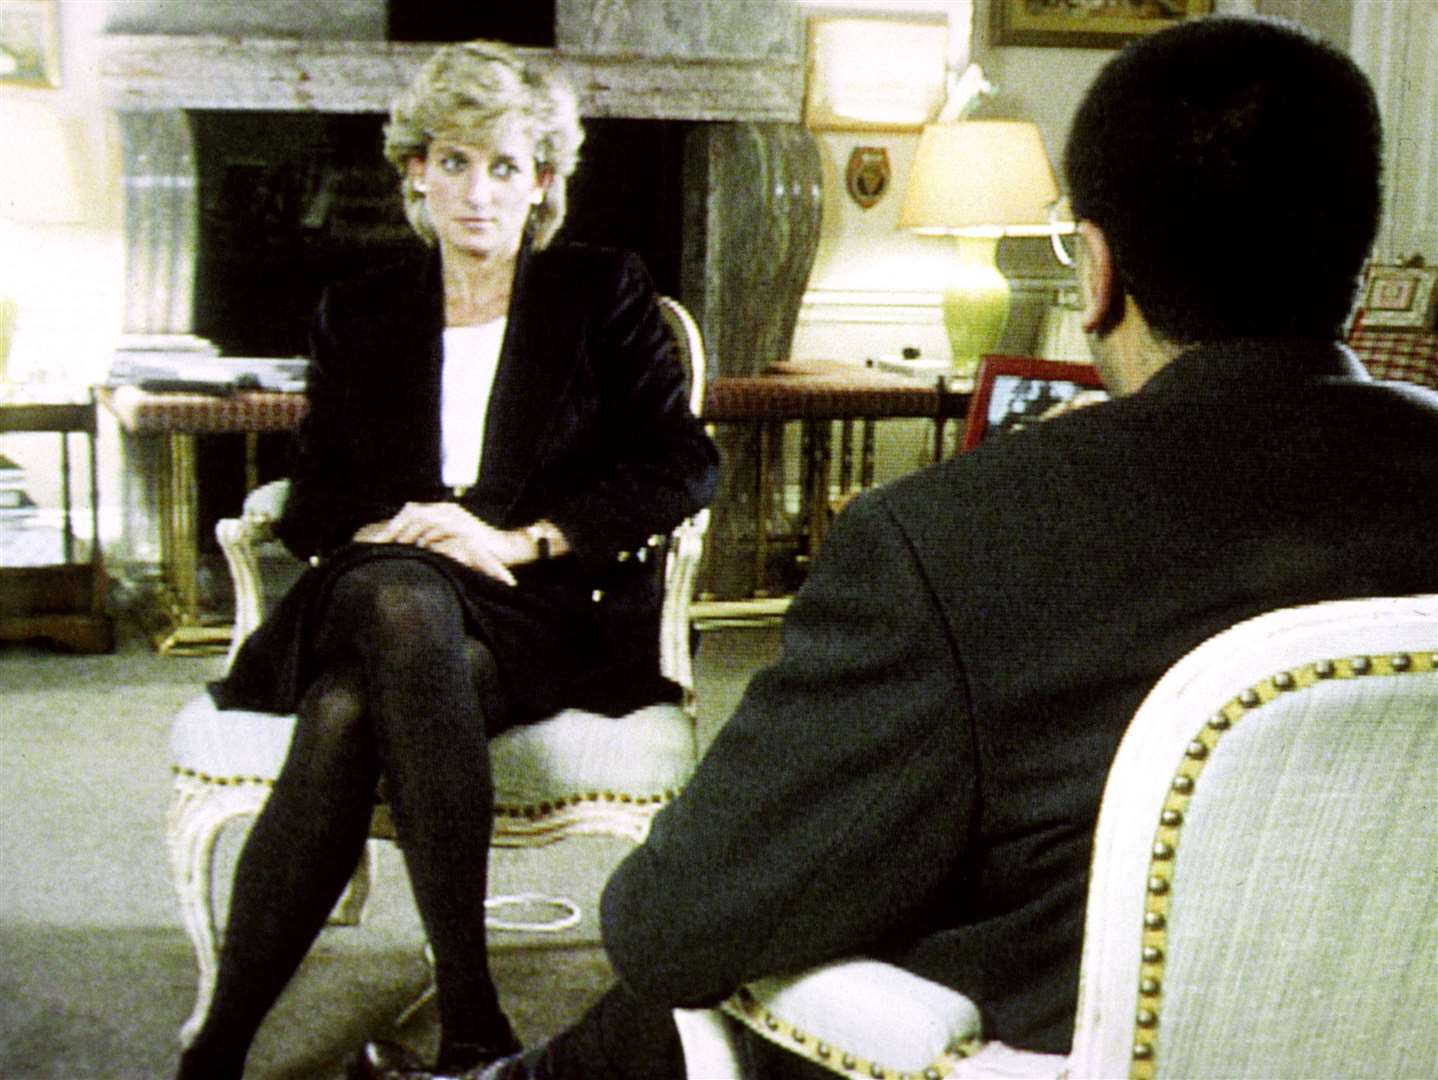 Diana, Princess of Wales, during her 1995 interview with Martin Bashir for the BBC (PA)